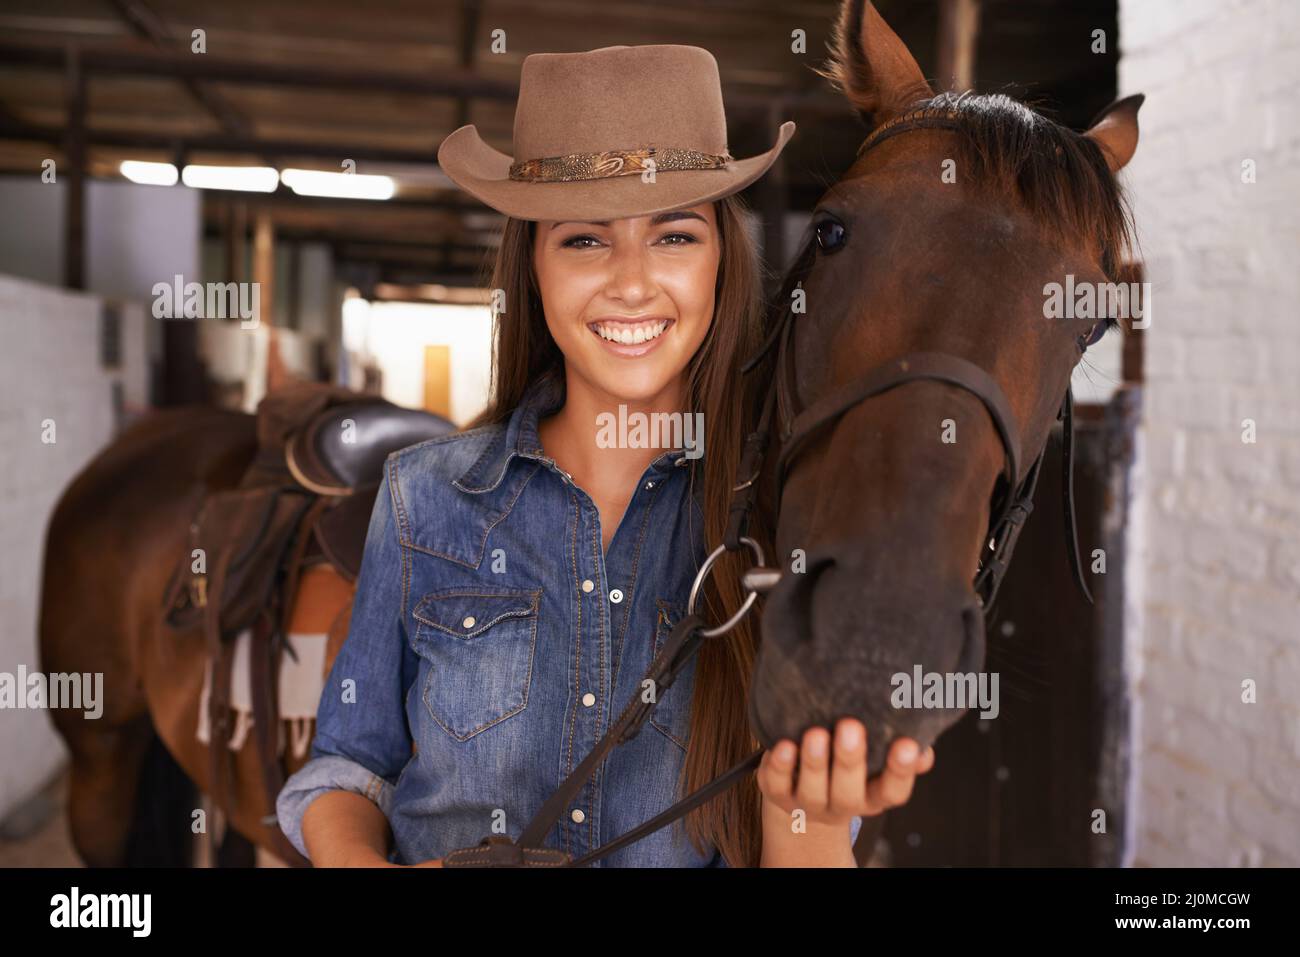 A girls best friend. Shot of a young woman tending to her horse. Stock Photo